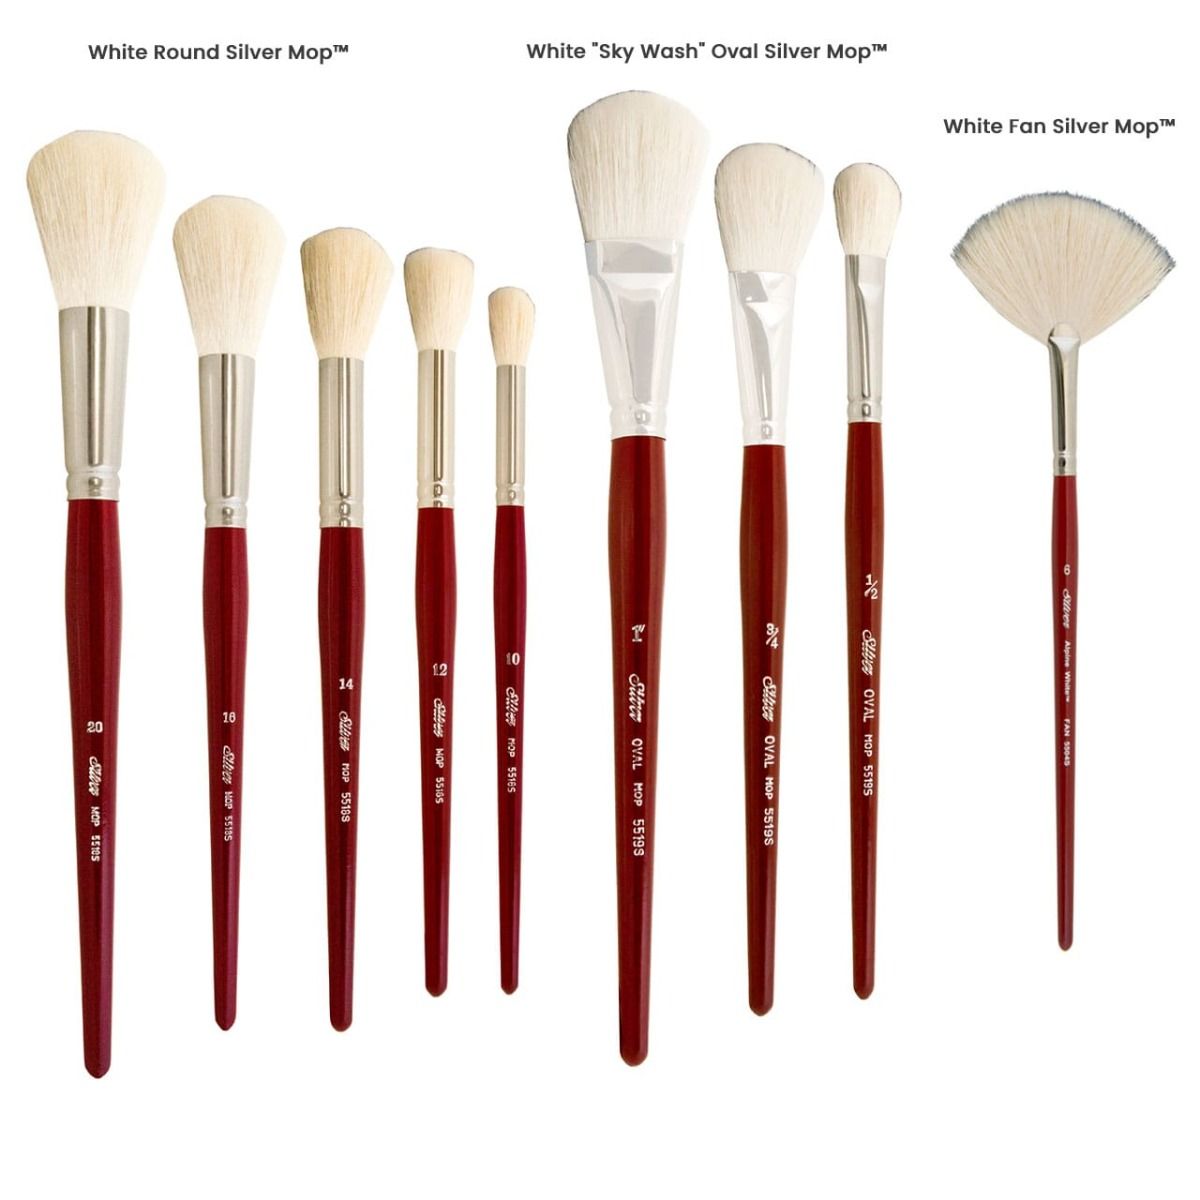 White Silver Mop™ Brushes